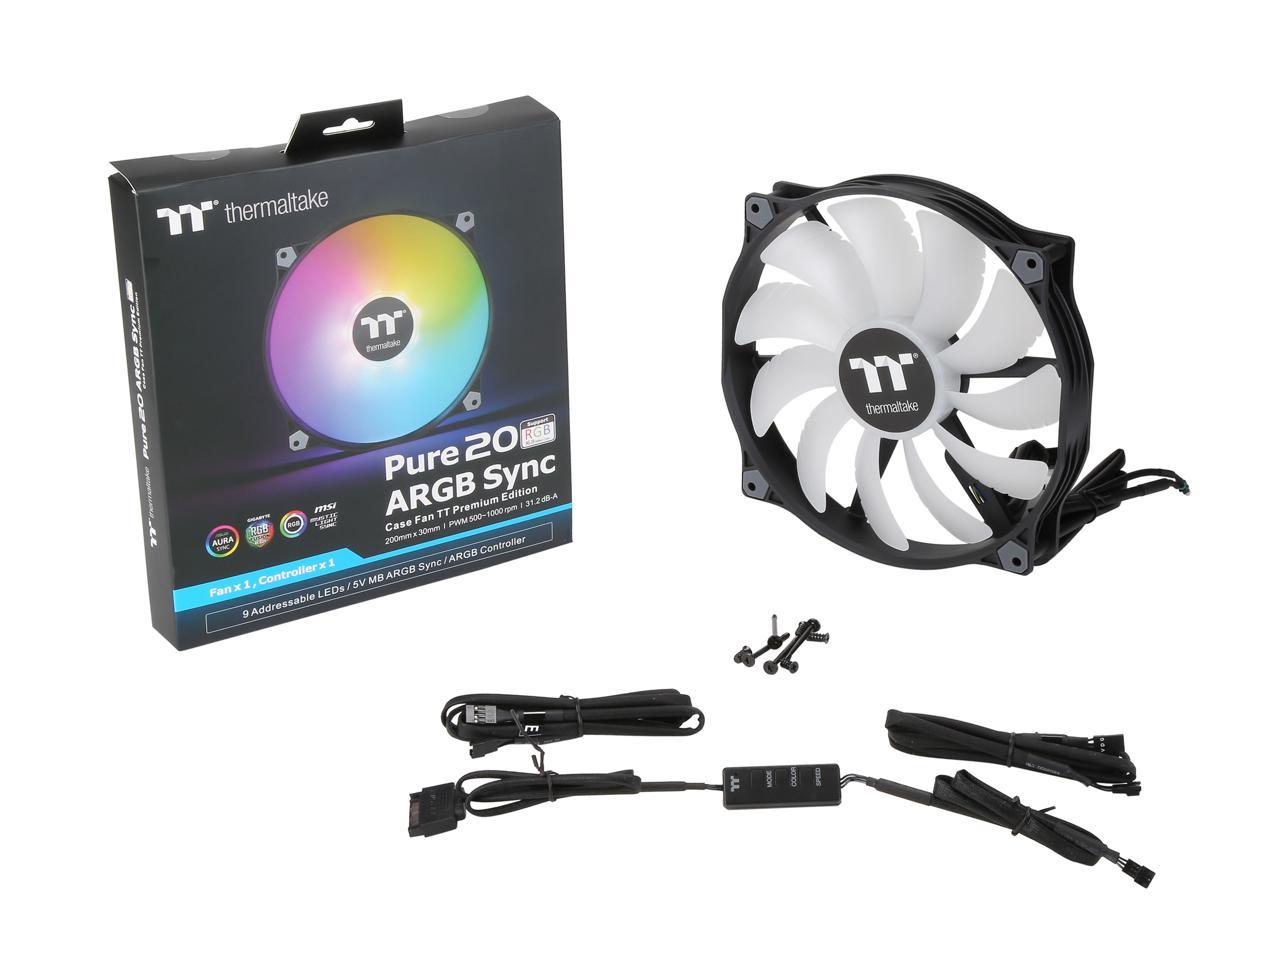 is thermaltake compatible with gigabyte rgb fusion